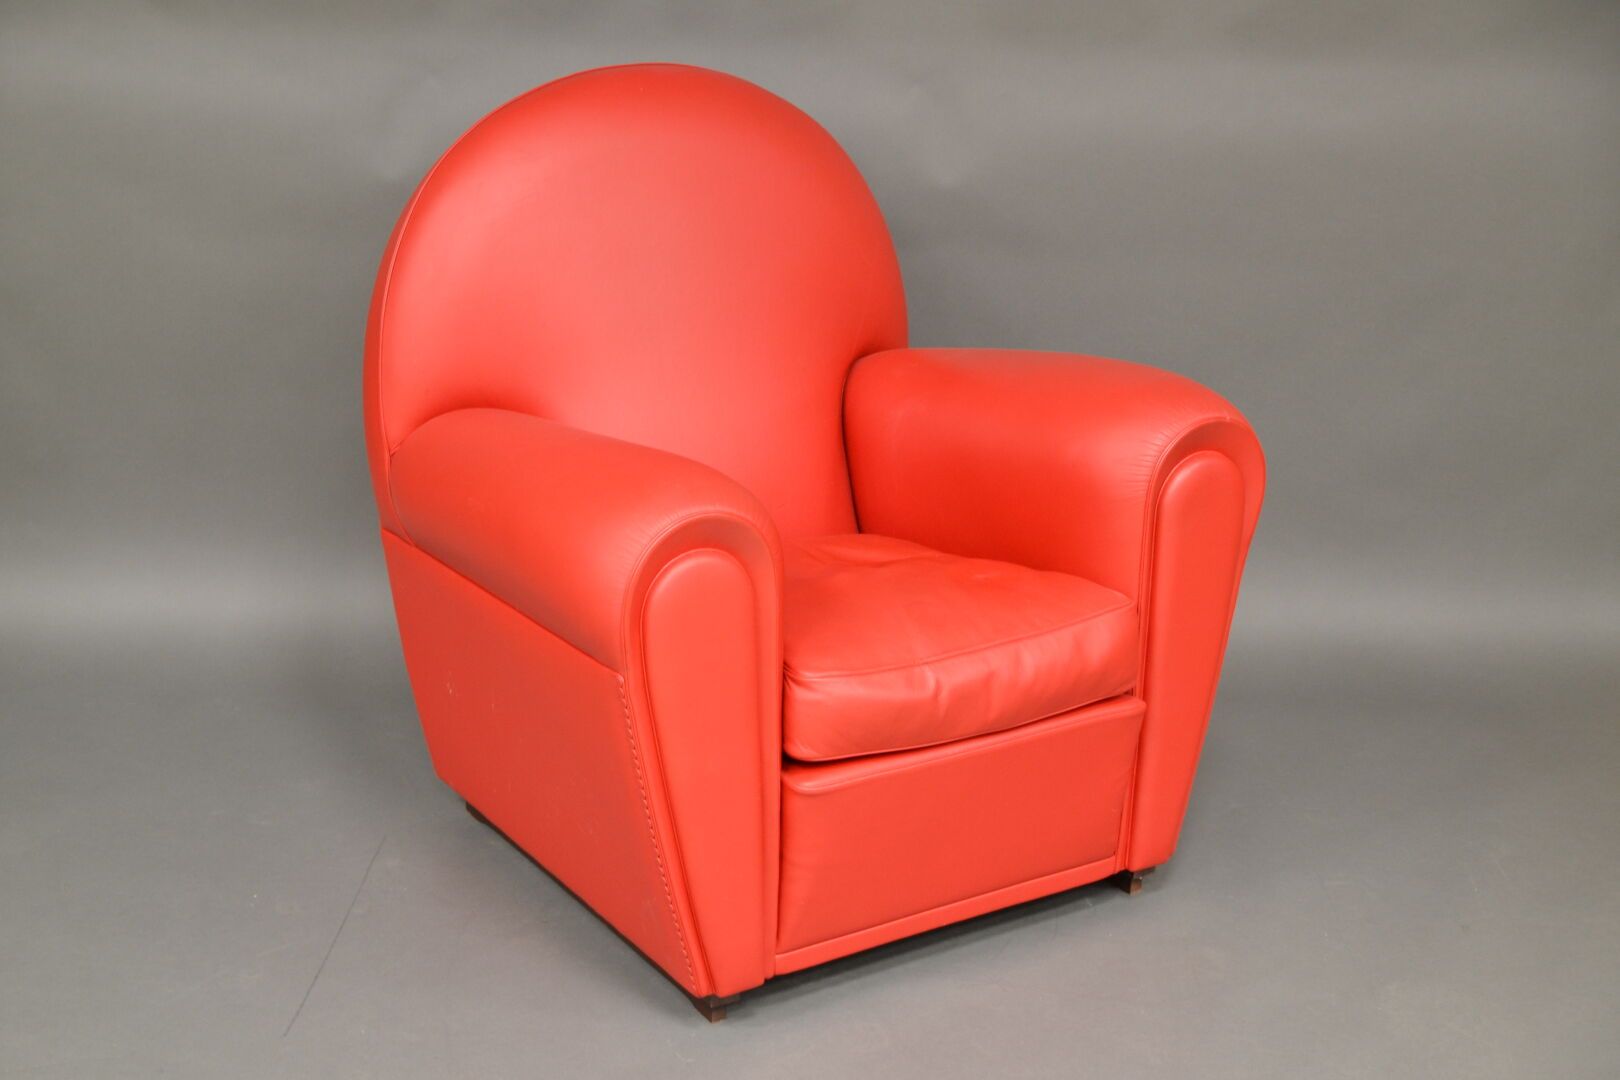 Null POLTRONA FRAU. Vanity Fair model. Club armchair upholstered in red leather.